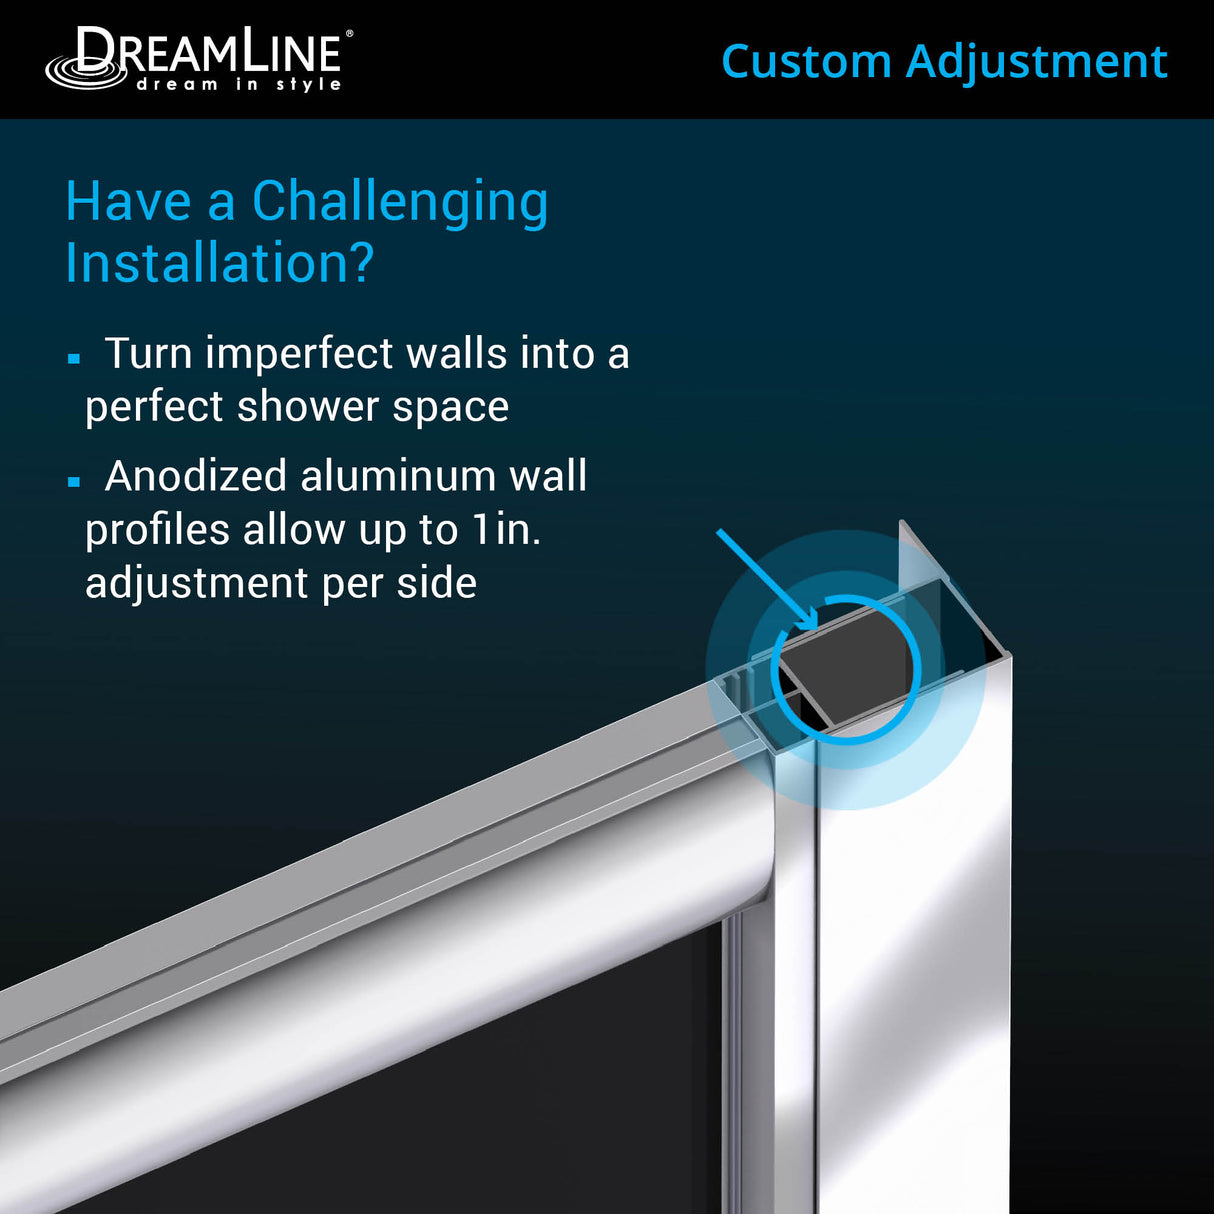 DreamLine Prime 38 in. x 74 3/4 in. Semi-Frameless Frosted Glass Sliding Shower Enclosure in Oil Rubbed Bronze, Biscuit Base Kit